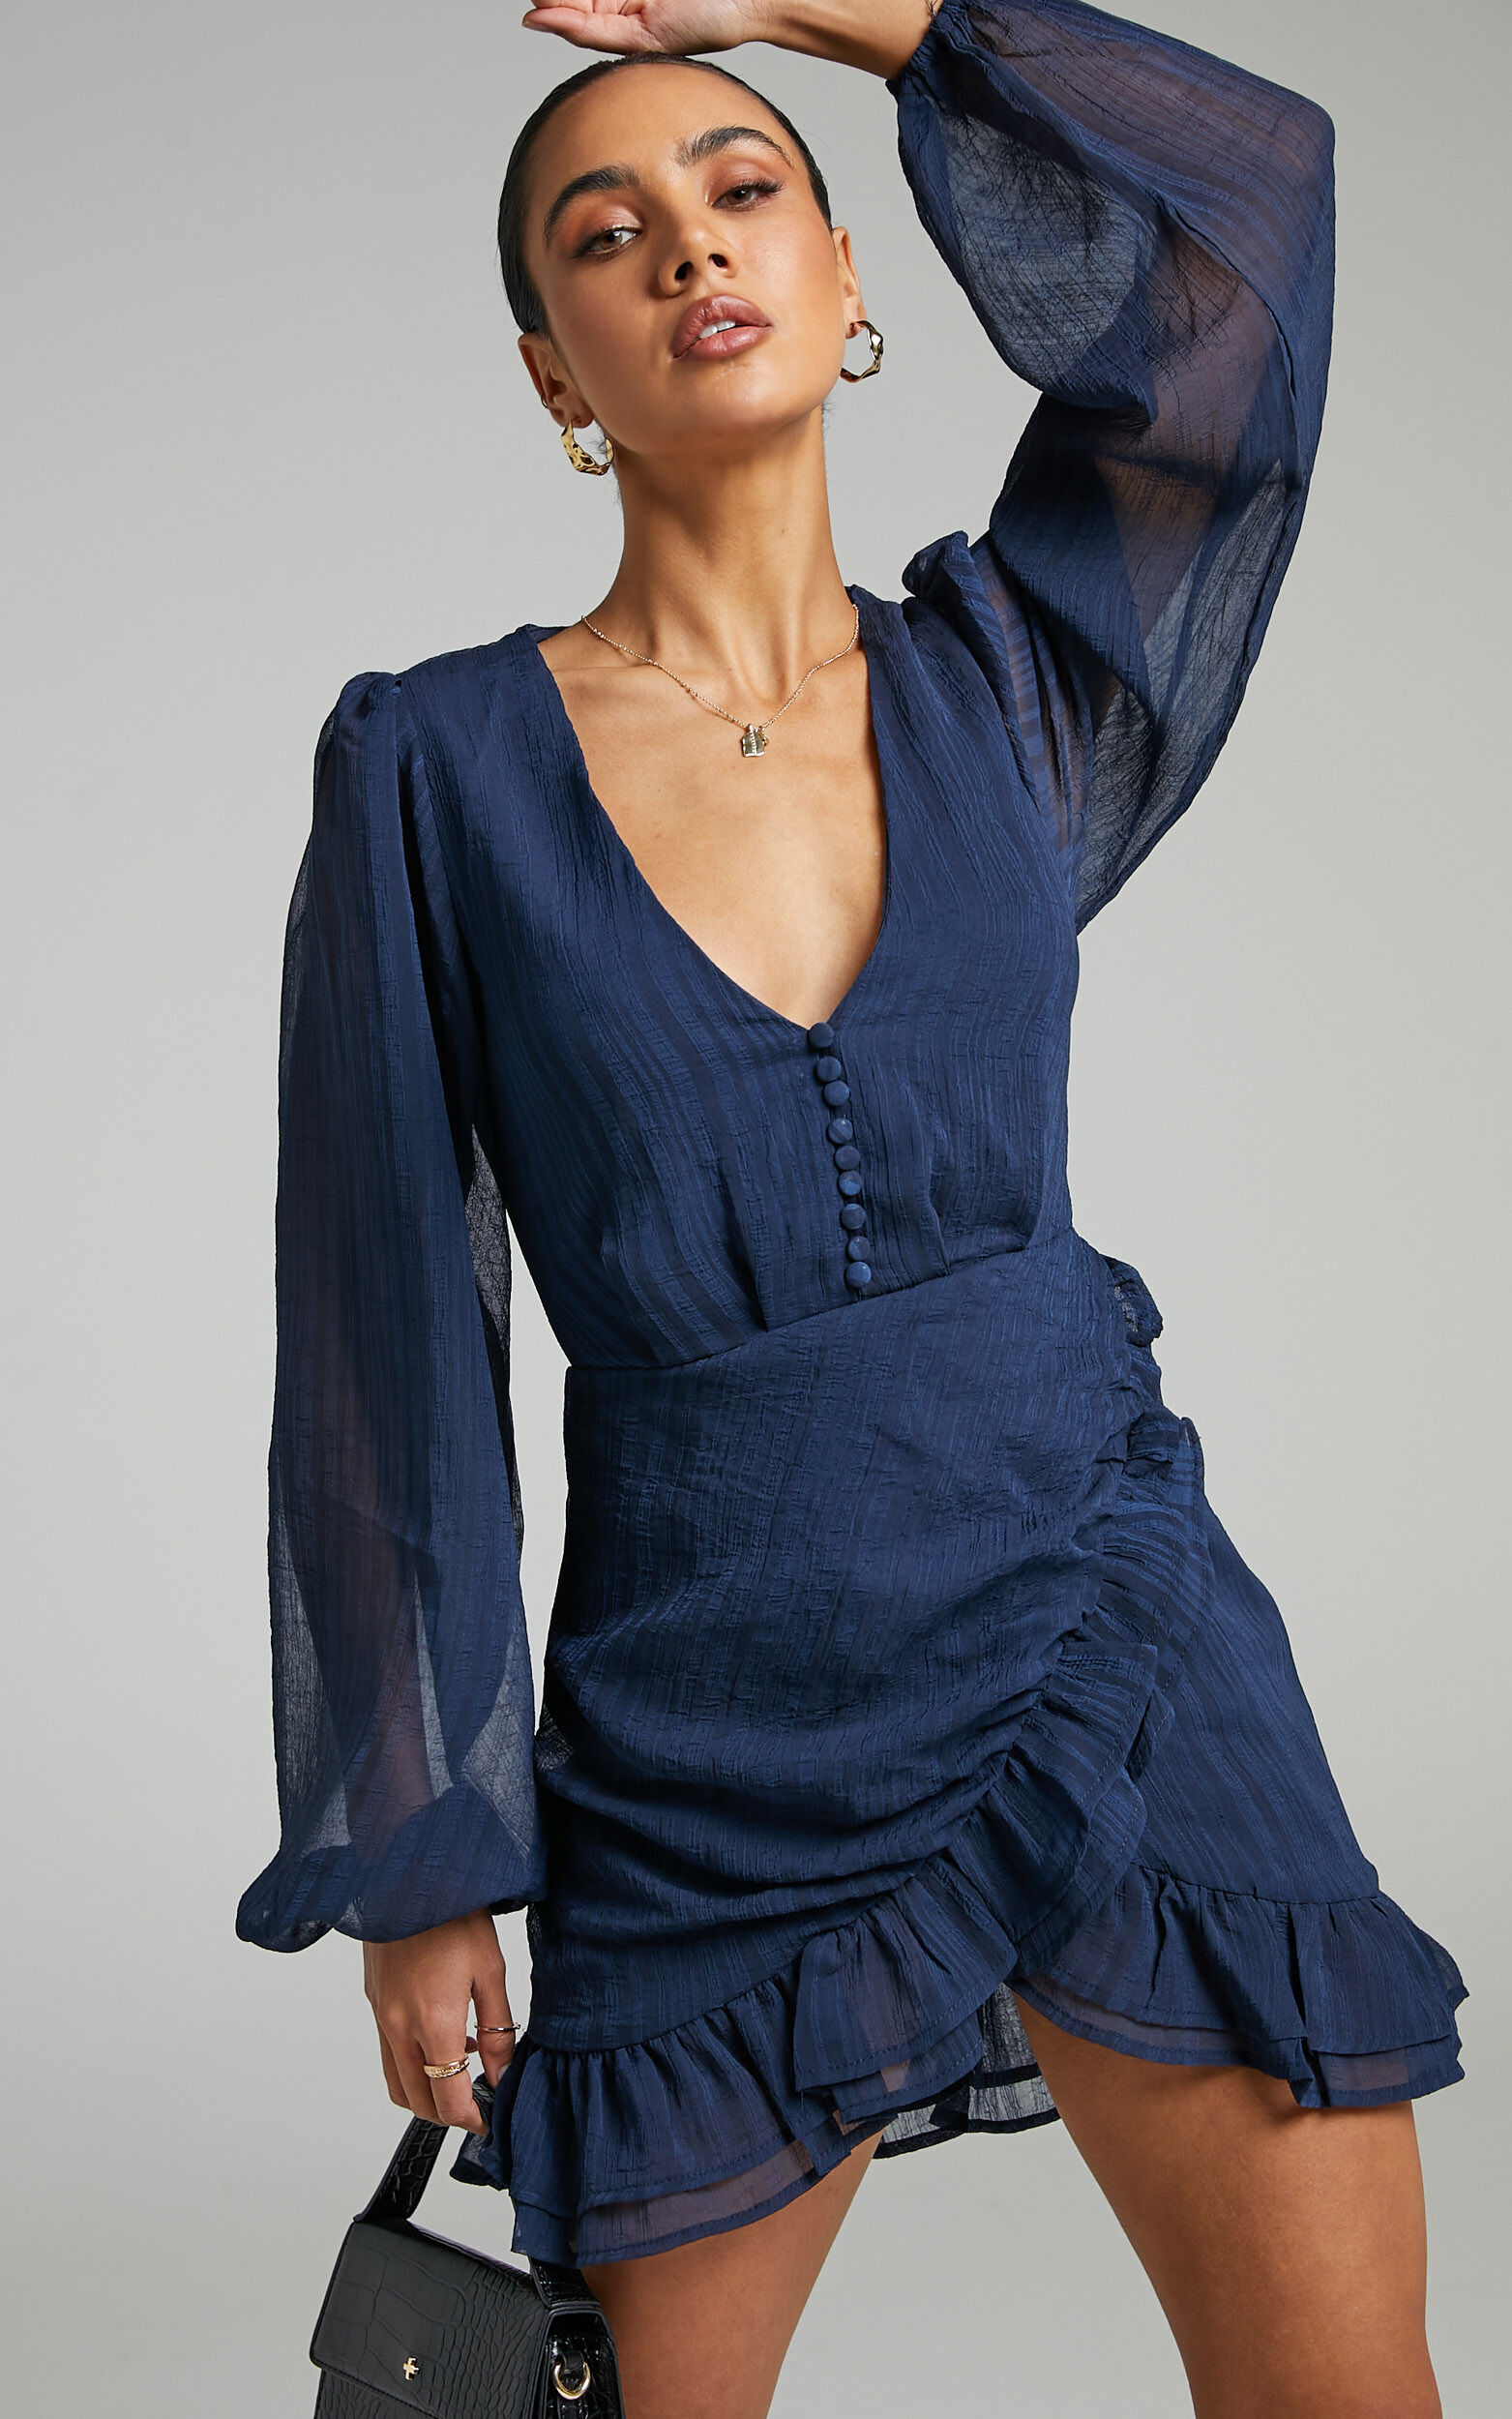 Amoretta Textured Chiffon Mini Dress with Frills in Navy - 04, NVY1, super-hi-res image number null